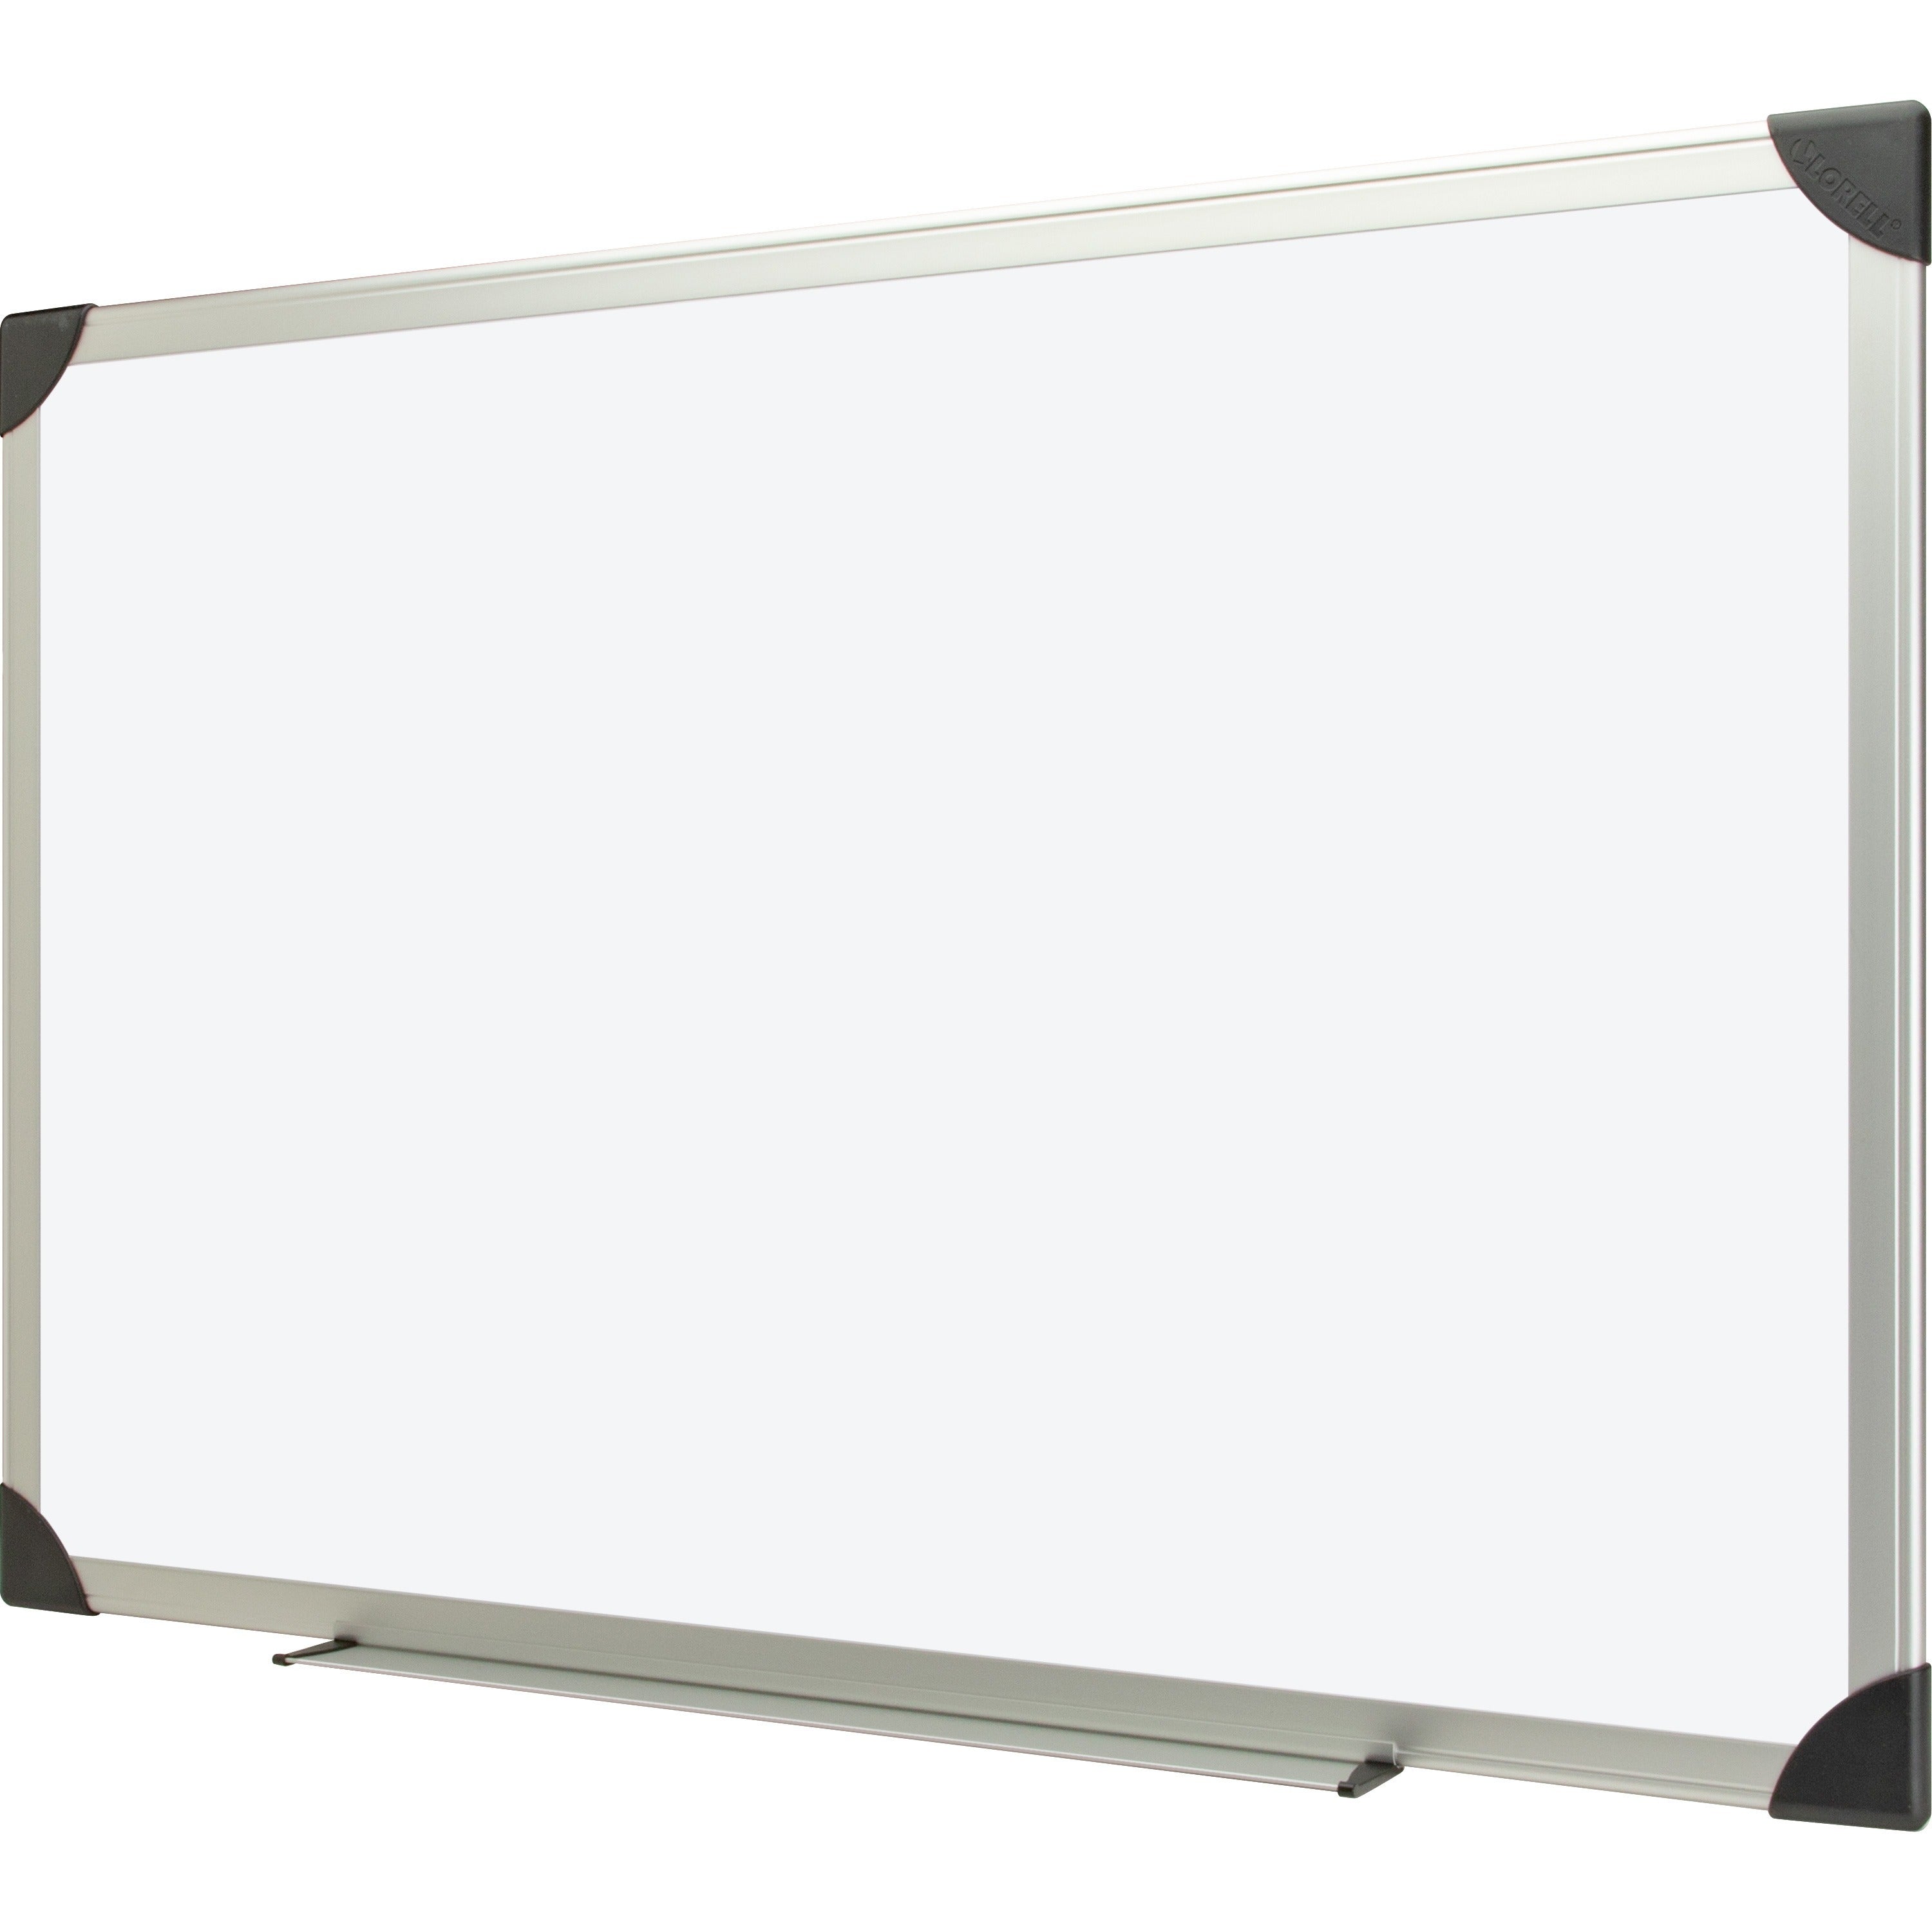 Lorell Dry-erase Board - 72" (6 ft) Width x 48" (4 ft) Height - White Styrene Surface - Aluminum Frame - Ghost Resistant, Scratch Resistant - 1 Each - 